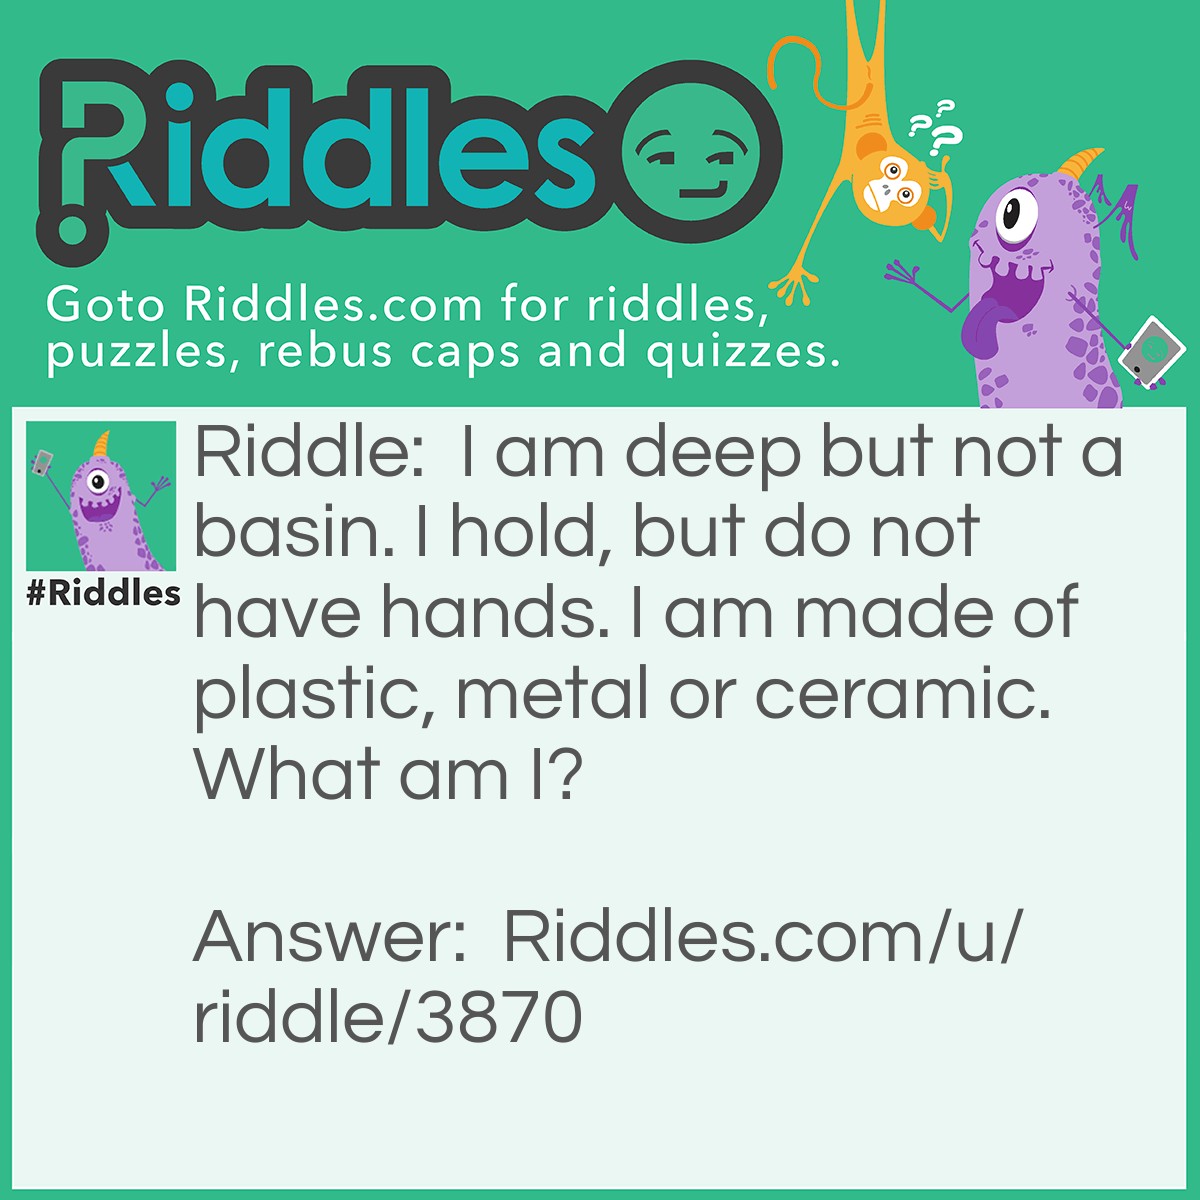 Riddle: I am deep but not a basin. I hold, but do not have hands. I am made of plastic, metal or ceramic. What am I? Answer: A bowl.